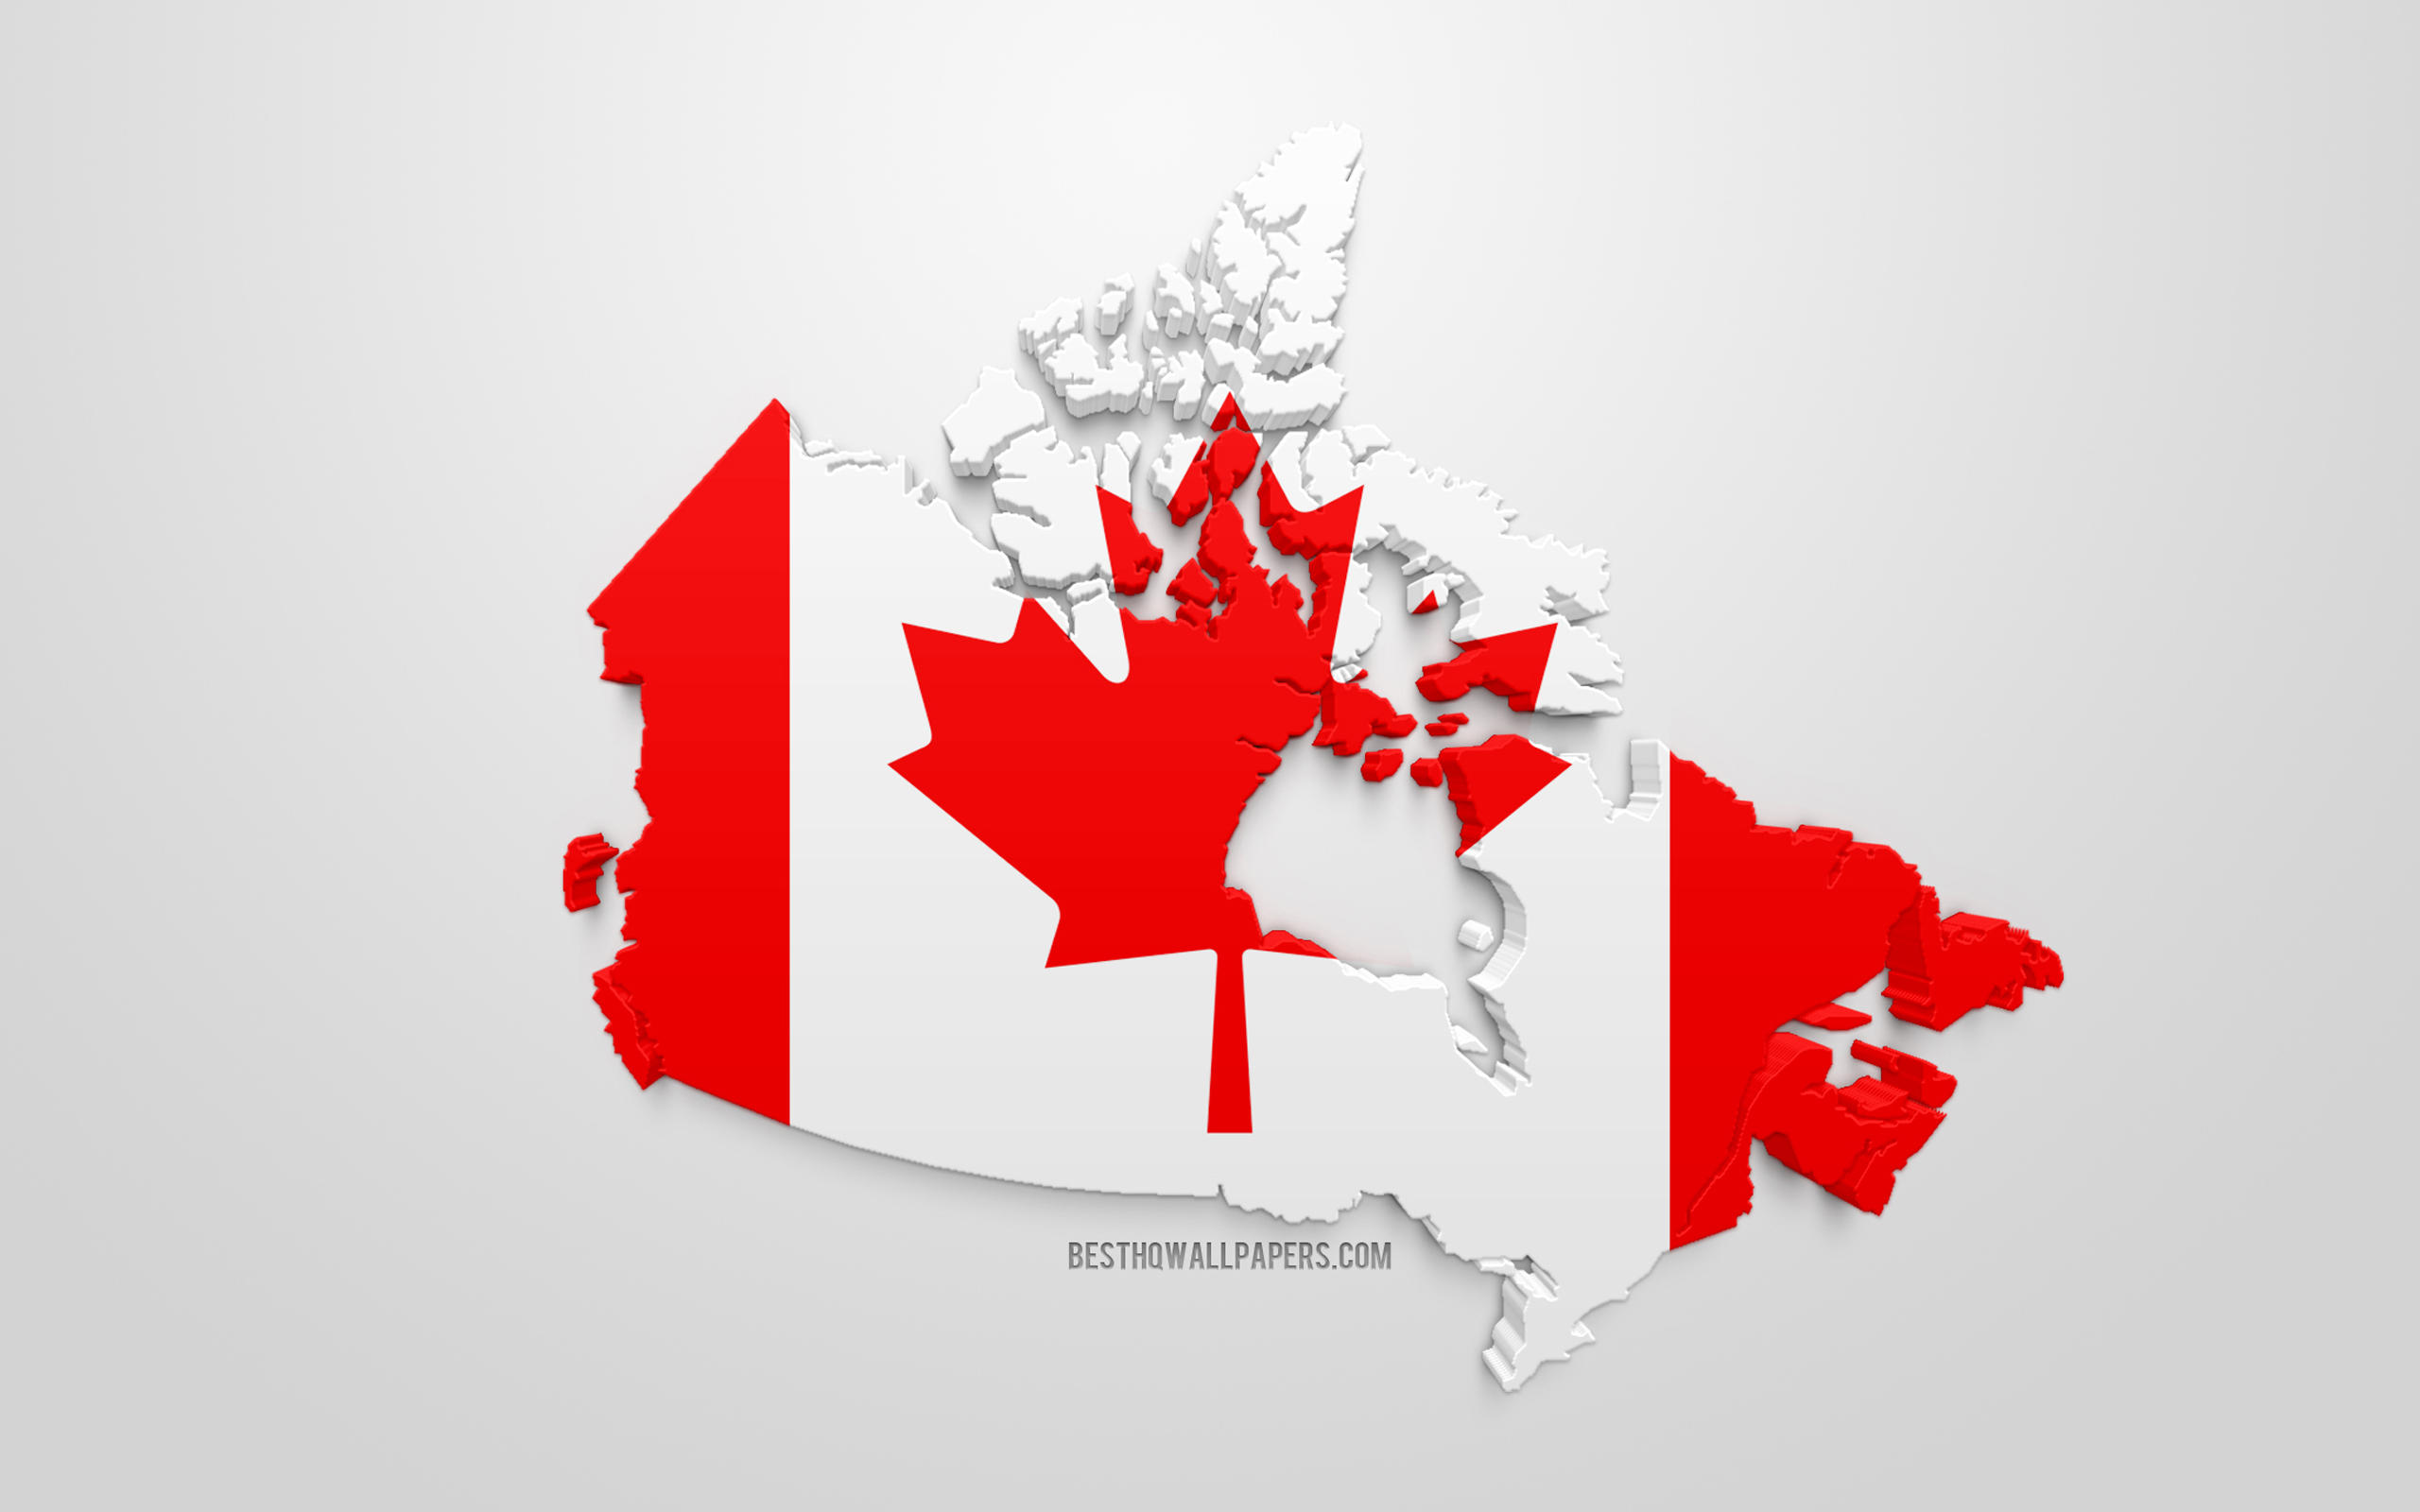 Download wallpaper 3D flag of Canada, silhouette map of Canada, 3D art, Canadian flag, North America, Canada, geography, Canada 3D silhouette for desktop with resolution 2560x1600. High Quality HD picture wallpaper